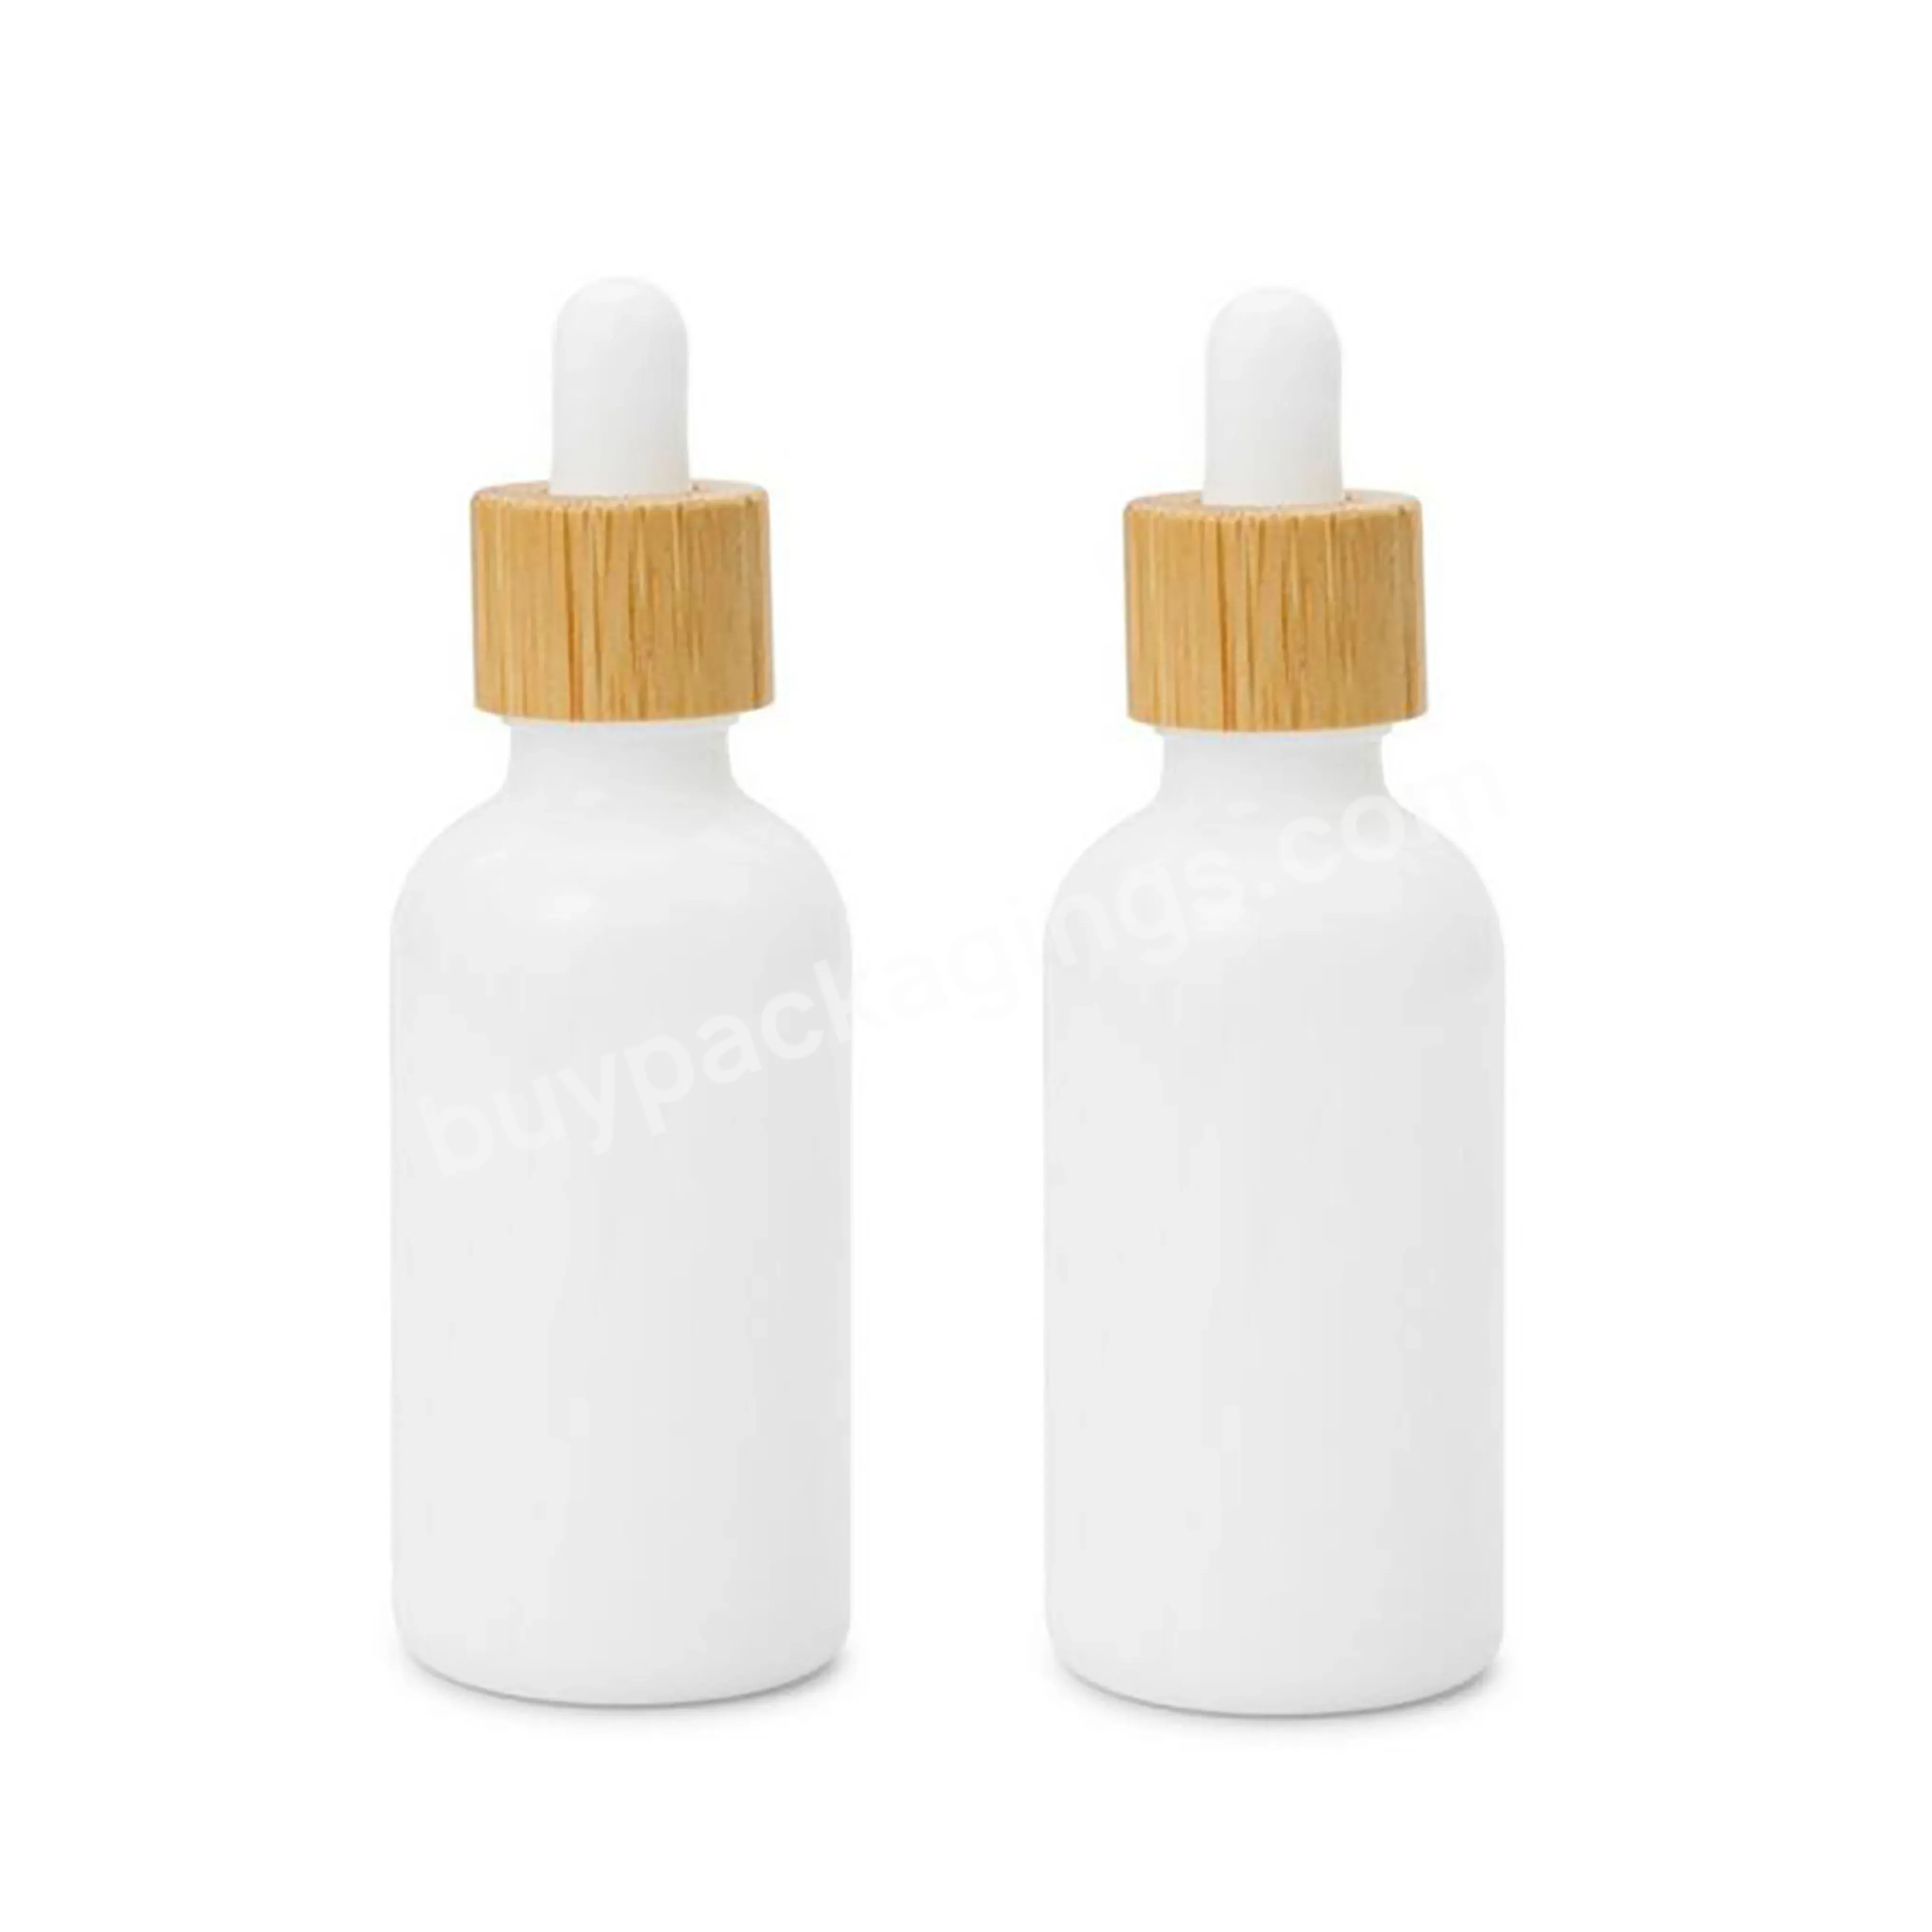 10-100ml Wholesale Essential Oil Spray Freckle Cream White Glass Porcelain Bottle With Wood Grain Dropper - Buy Wholesale Essential Oil Spray Freckle Cream Bottle,White Glass Porcelain Bottle,Bottle With Wood Grain Dropper.